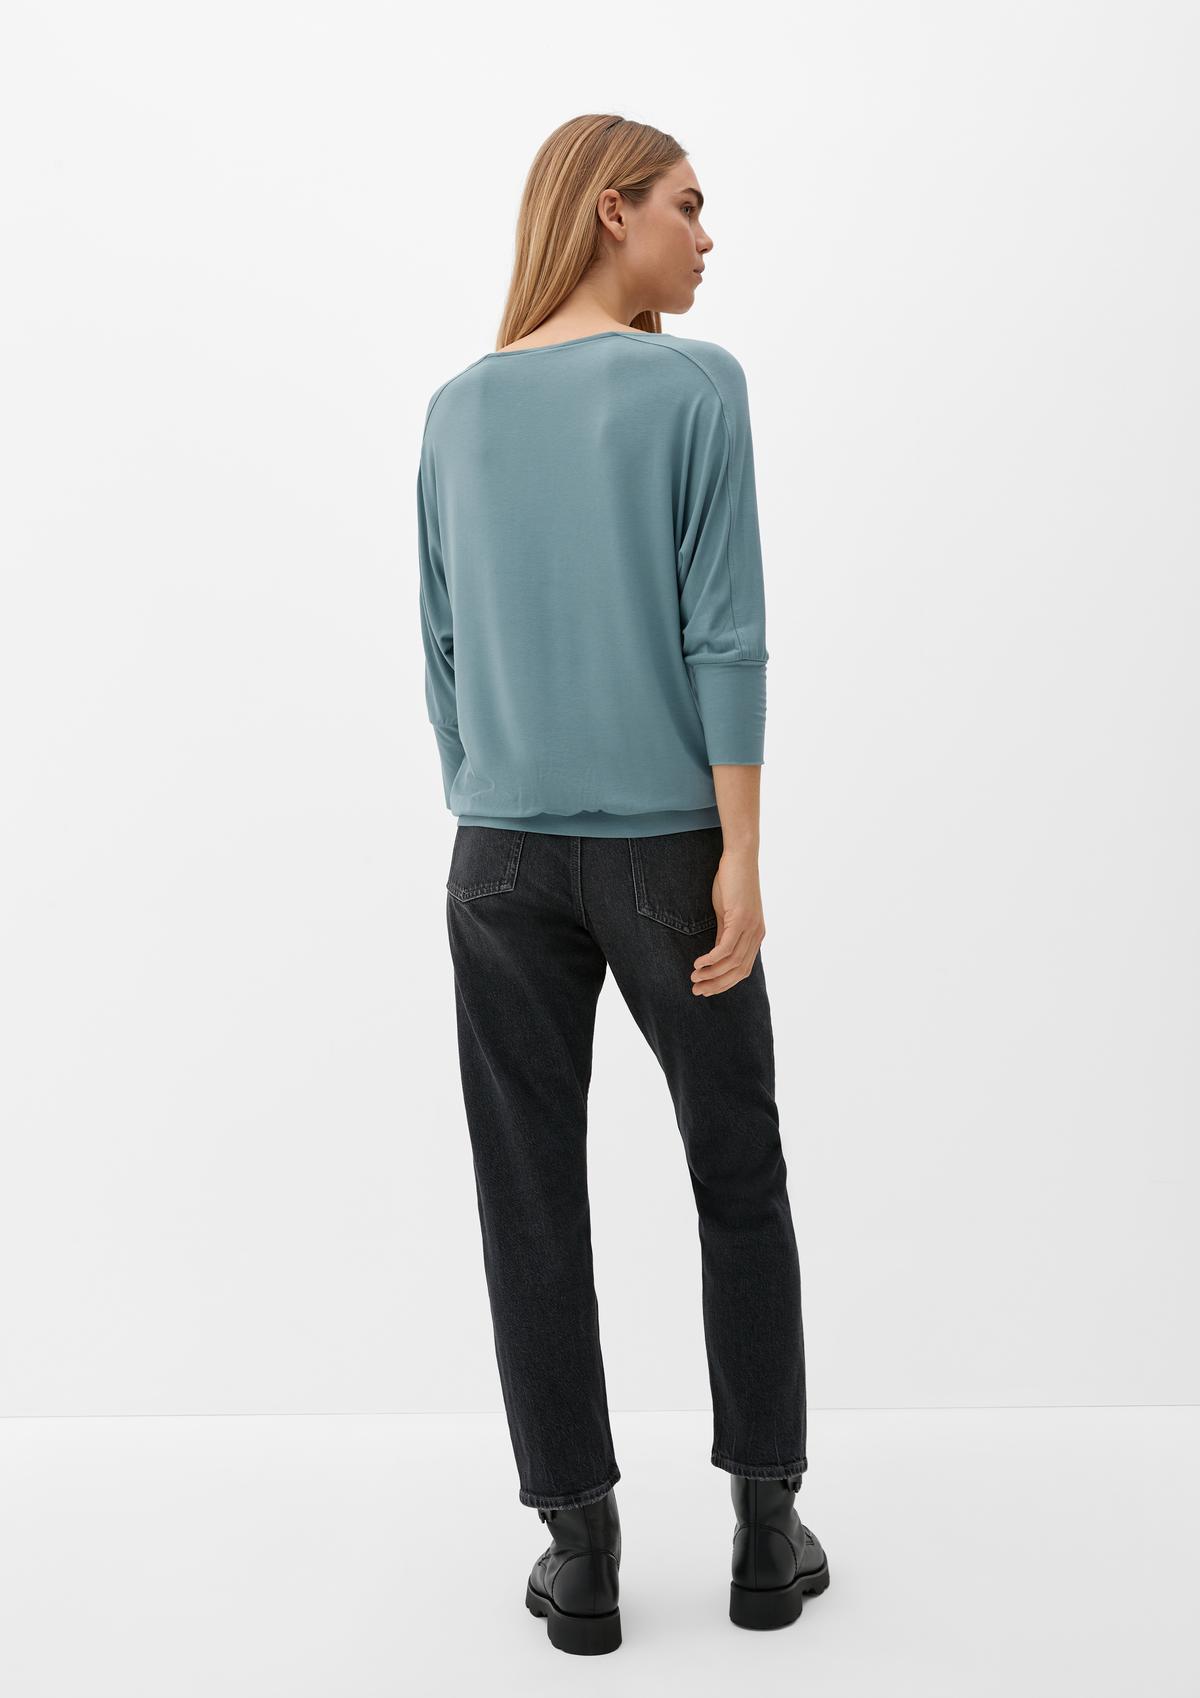 s.Oliver Top with batwing sleeves